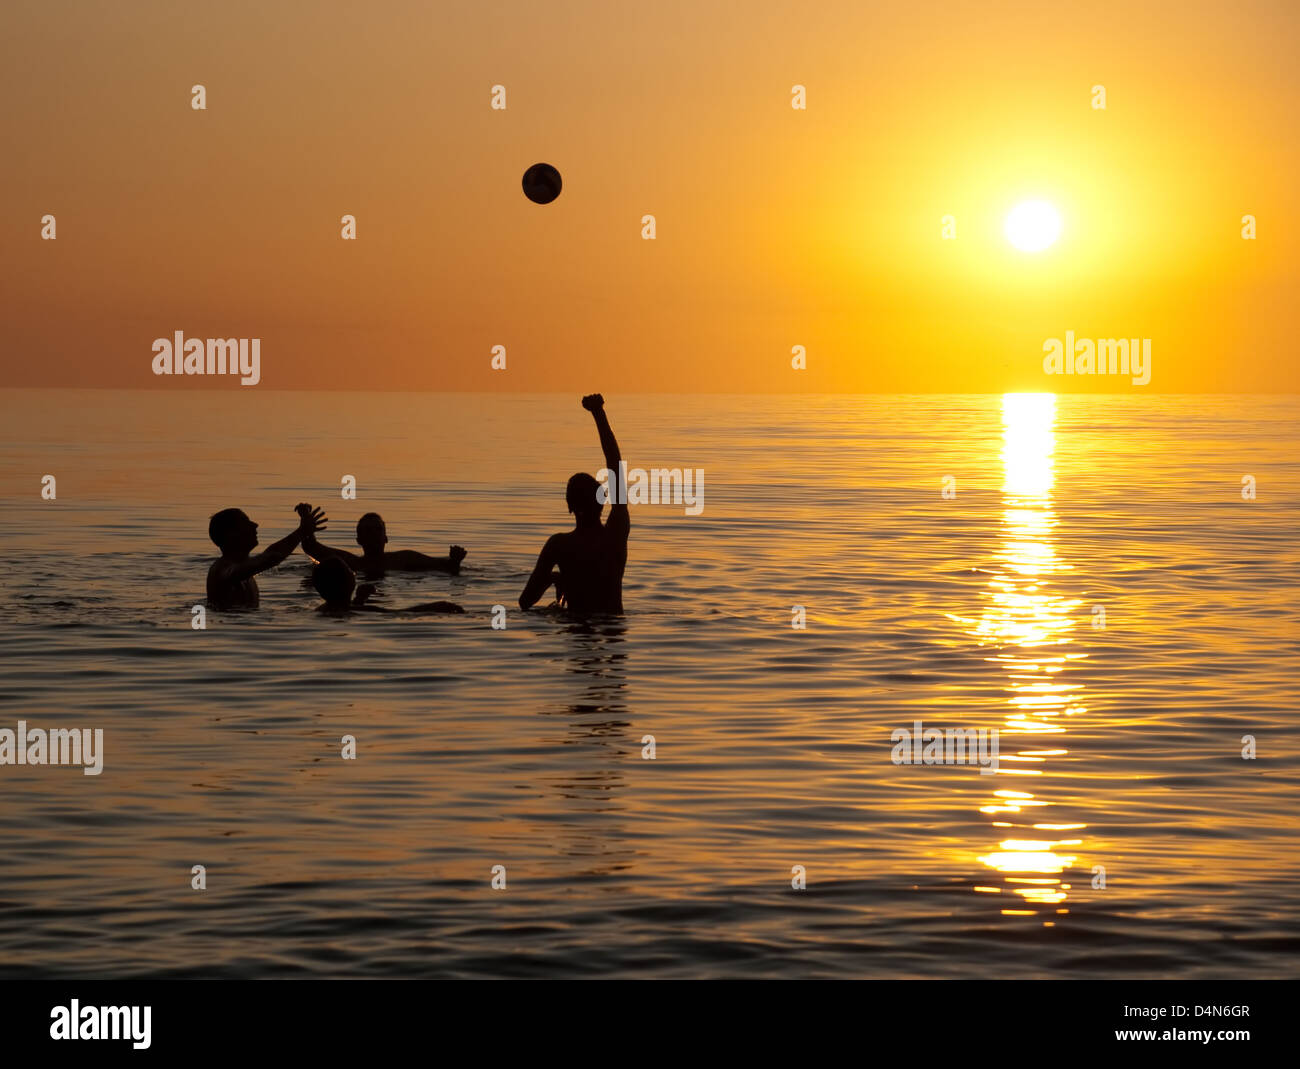 Young people playing in ocean at sunset Stock Photo